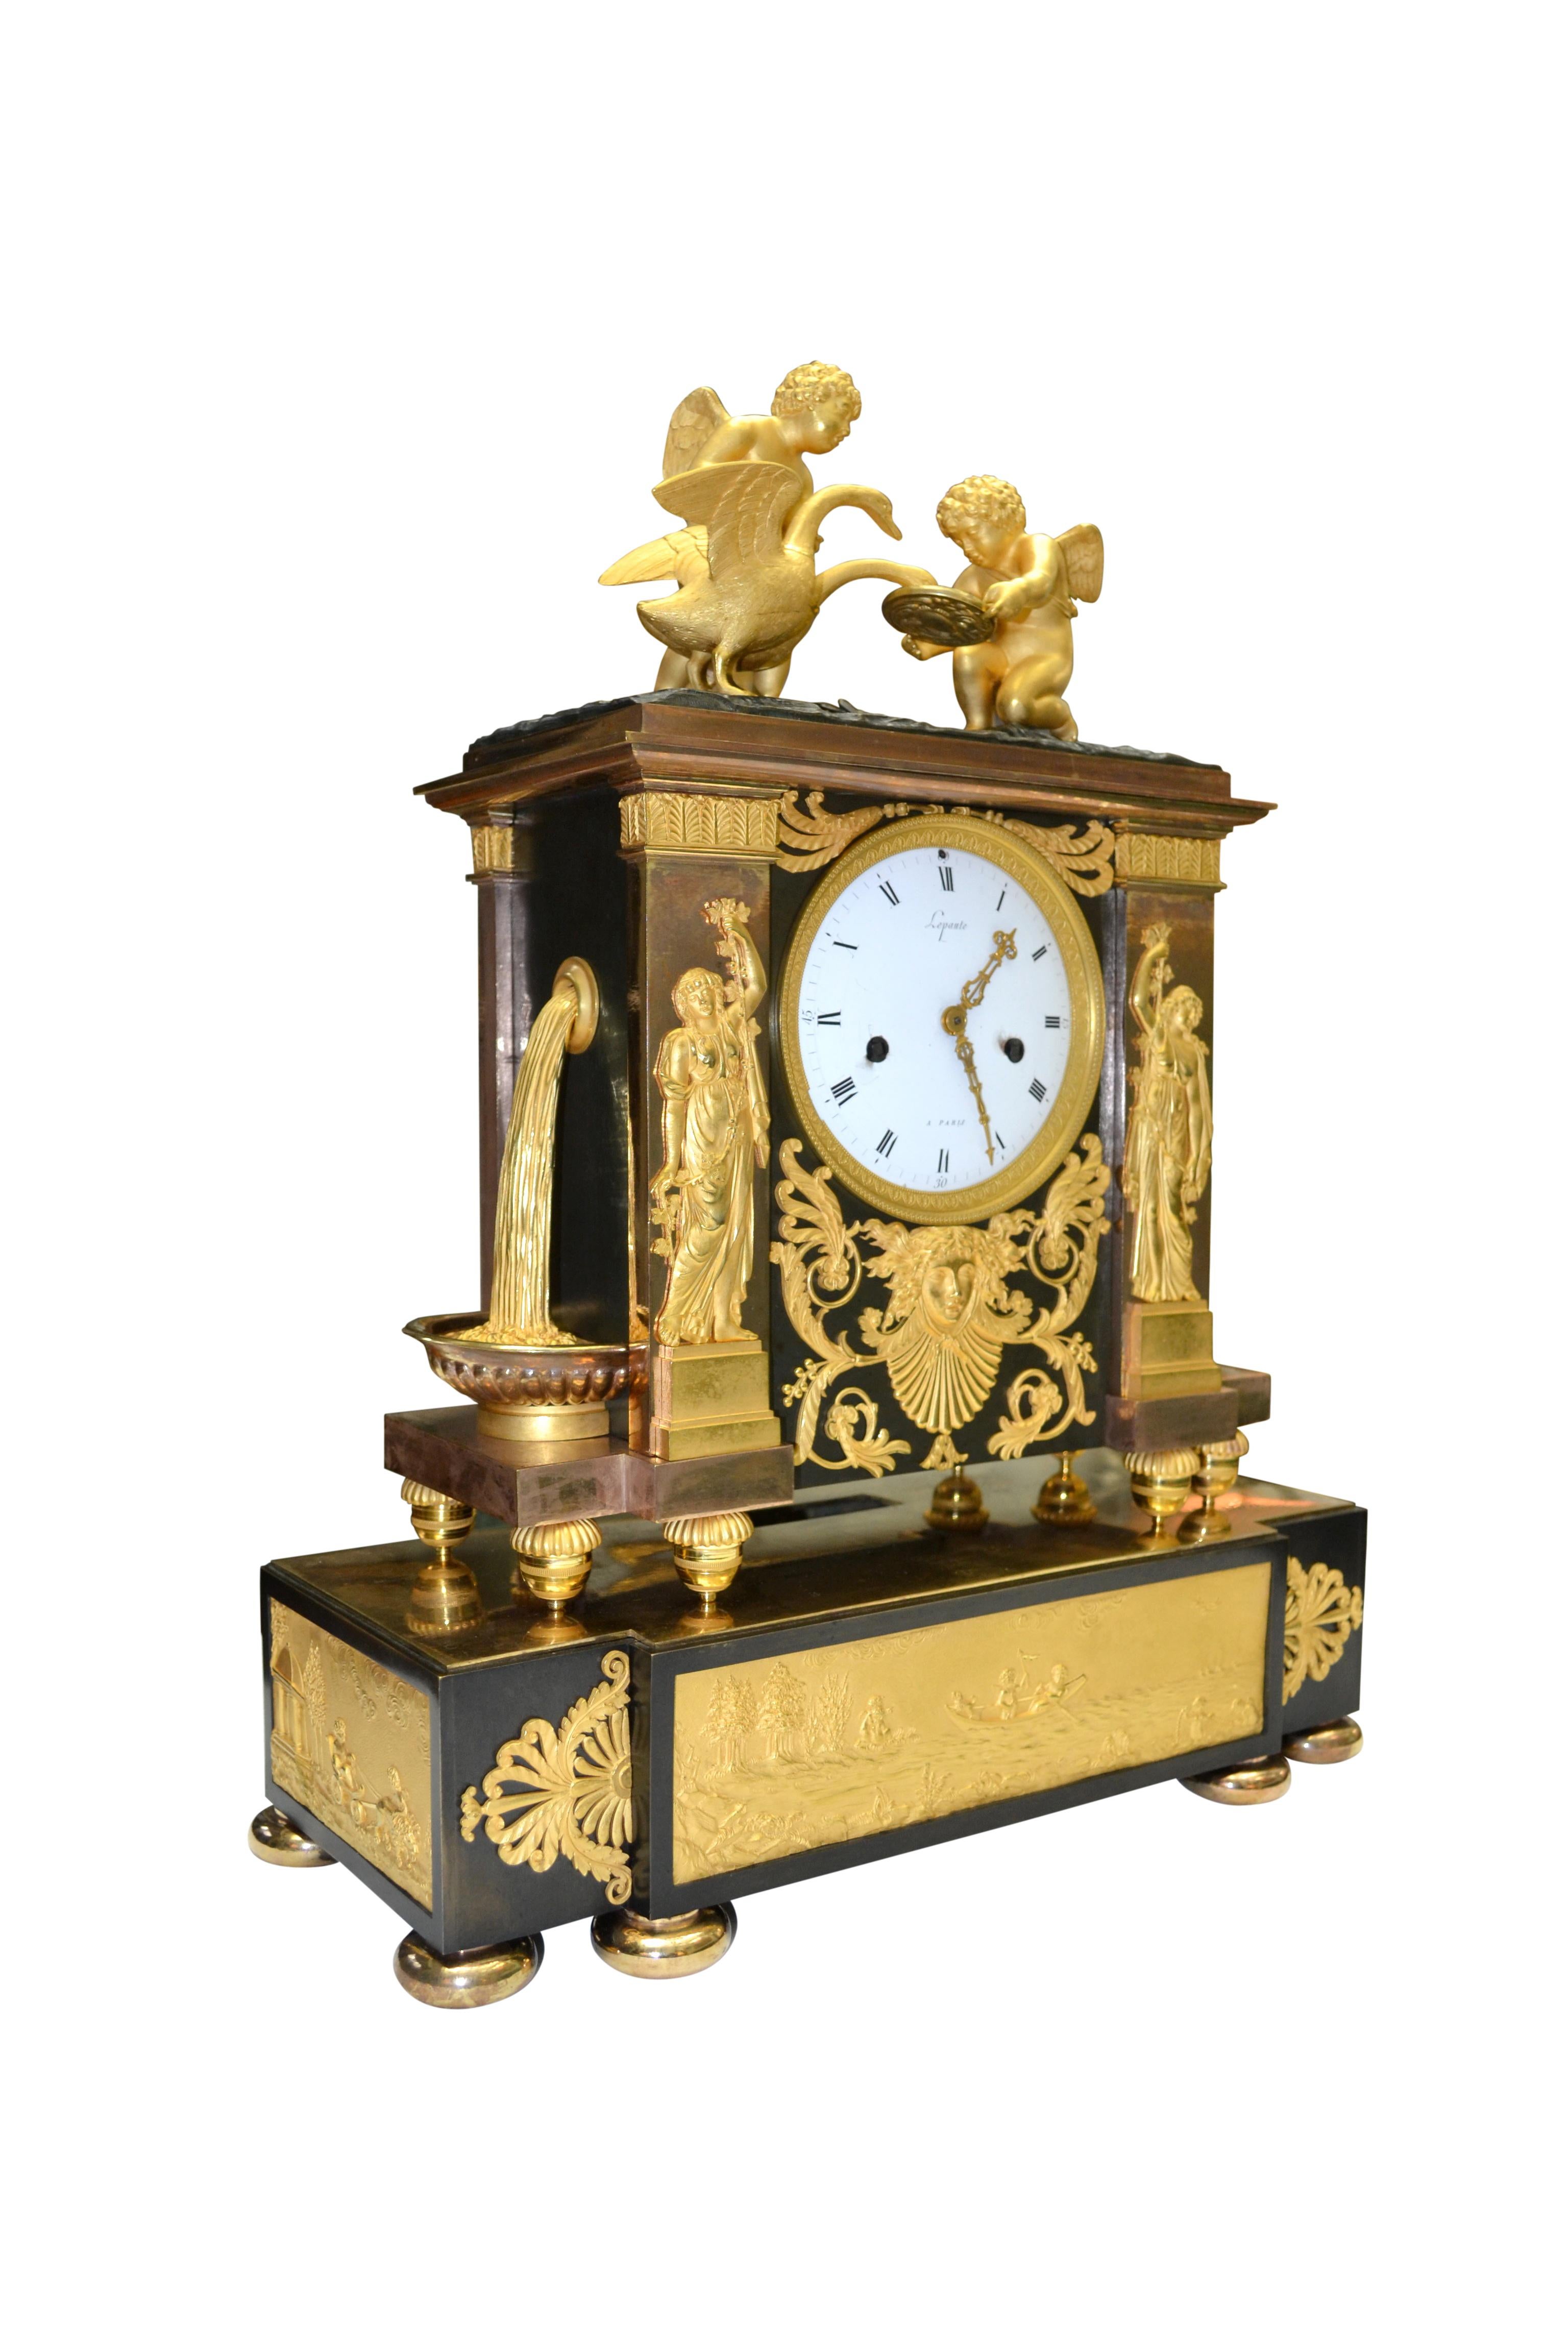 An extremely rare and important French Empire mantle clock signed by the master clock making dynasty of Jean-Andre Lepaute and his brother Jean-Baptiste Lepaute.

The case, in the form of an antique portal, is in two sections both in patinated